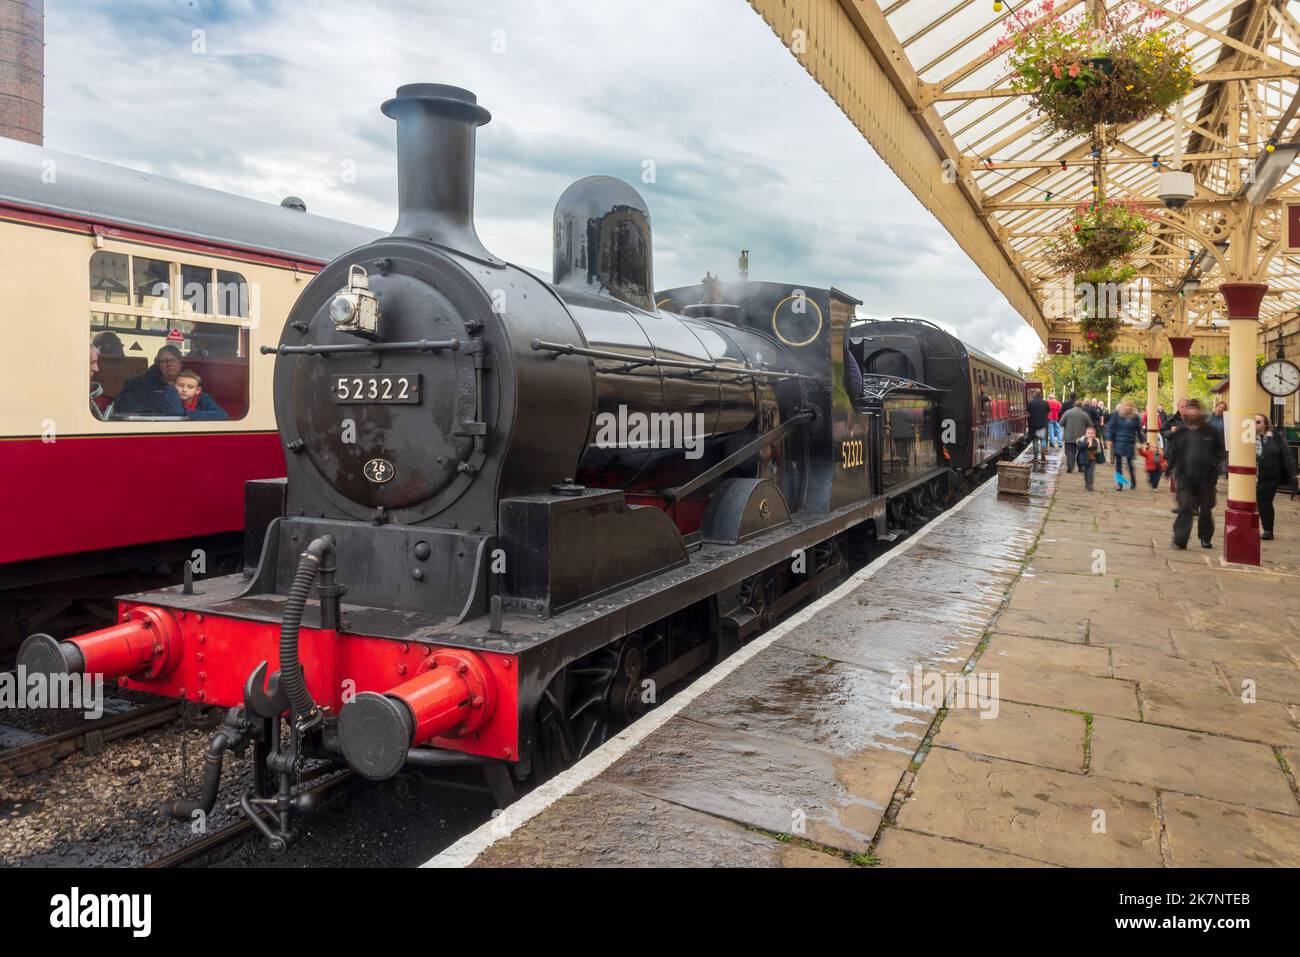 The Lancashire and Yorkshire Railway Class 27 0-6-0 steam locomotive seen at Ramsbottom station head for Rawtenstall during the autumn steam gala. Stock Photo